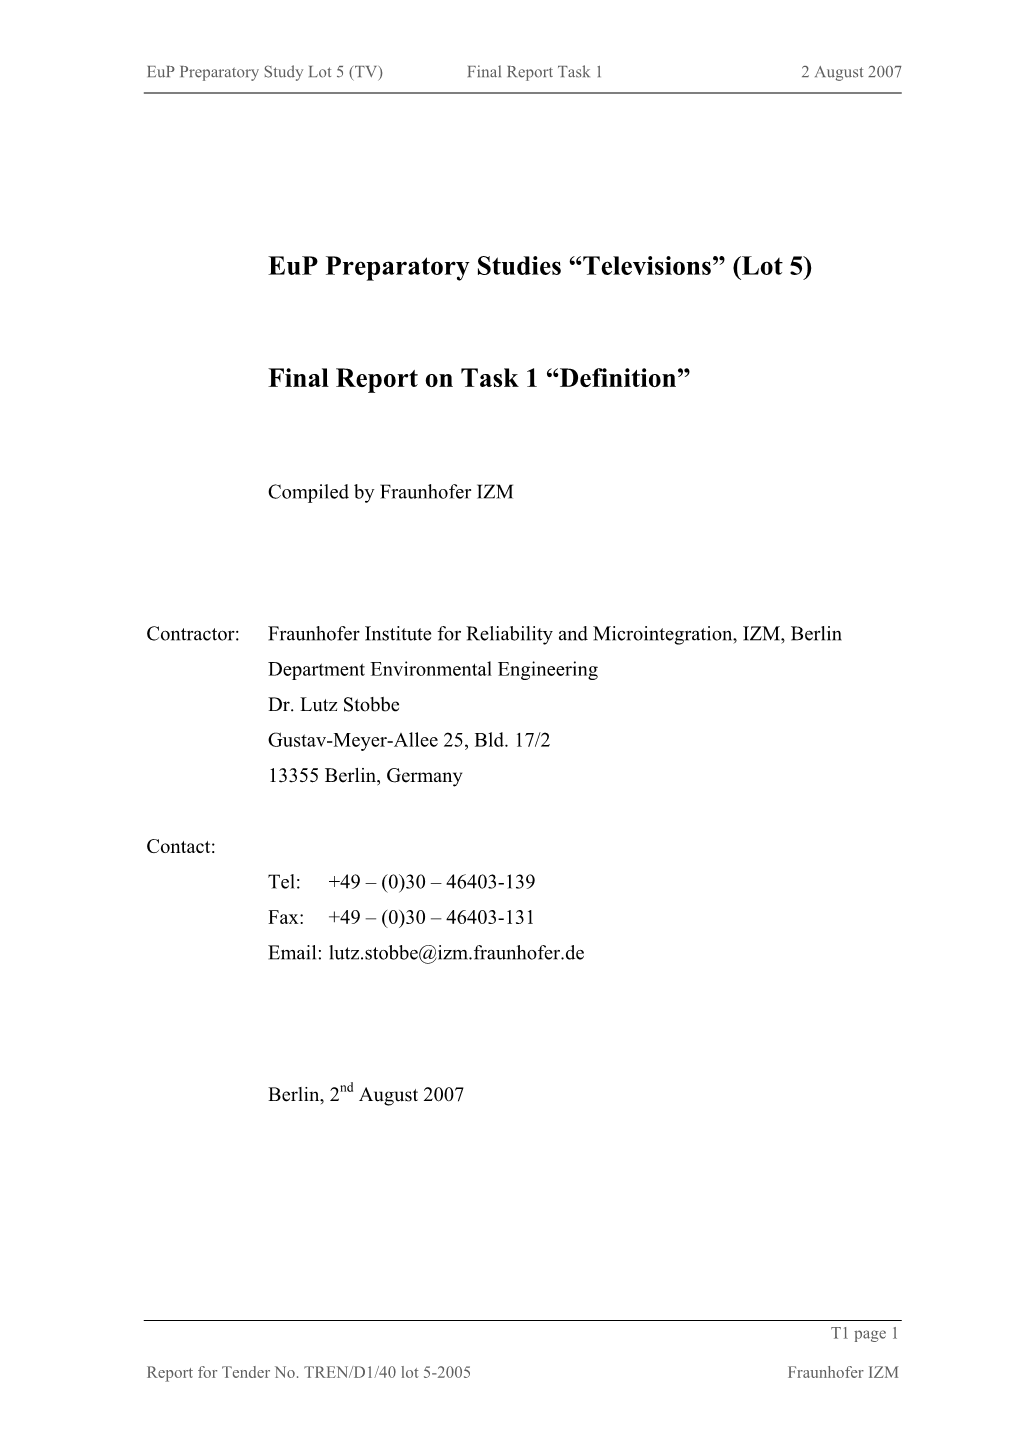 “Televisions” (Lot 5) Final Report on Task 1 “Definition”